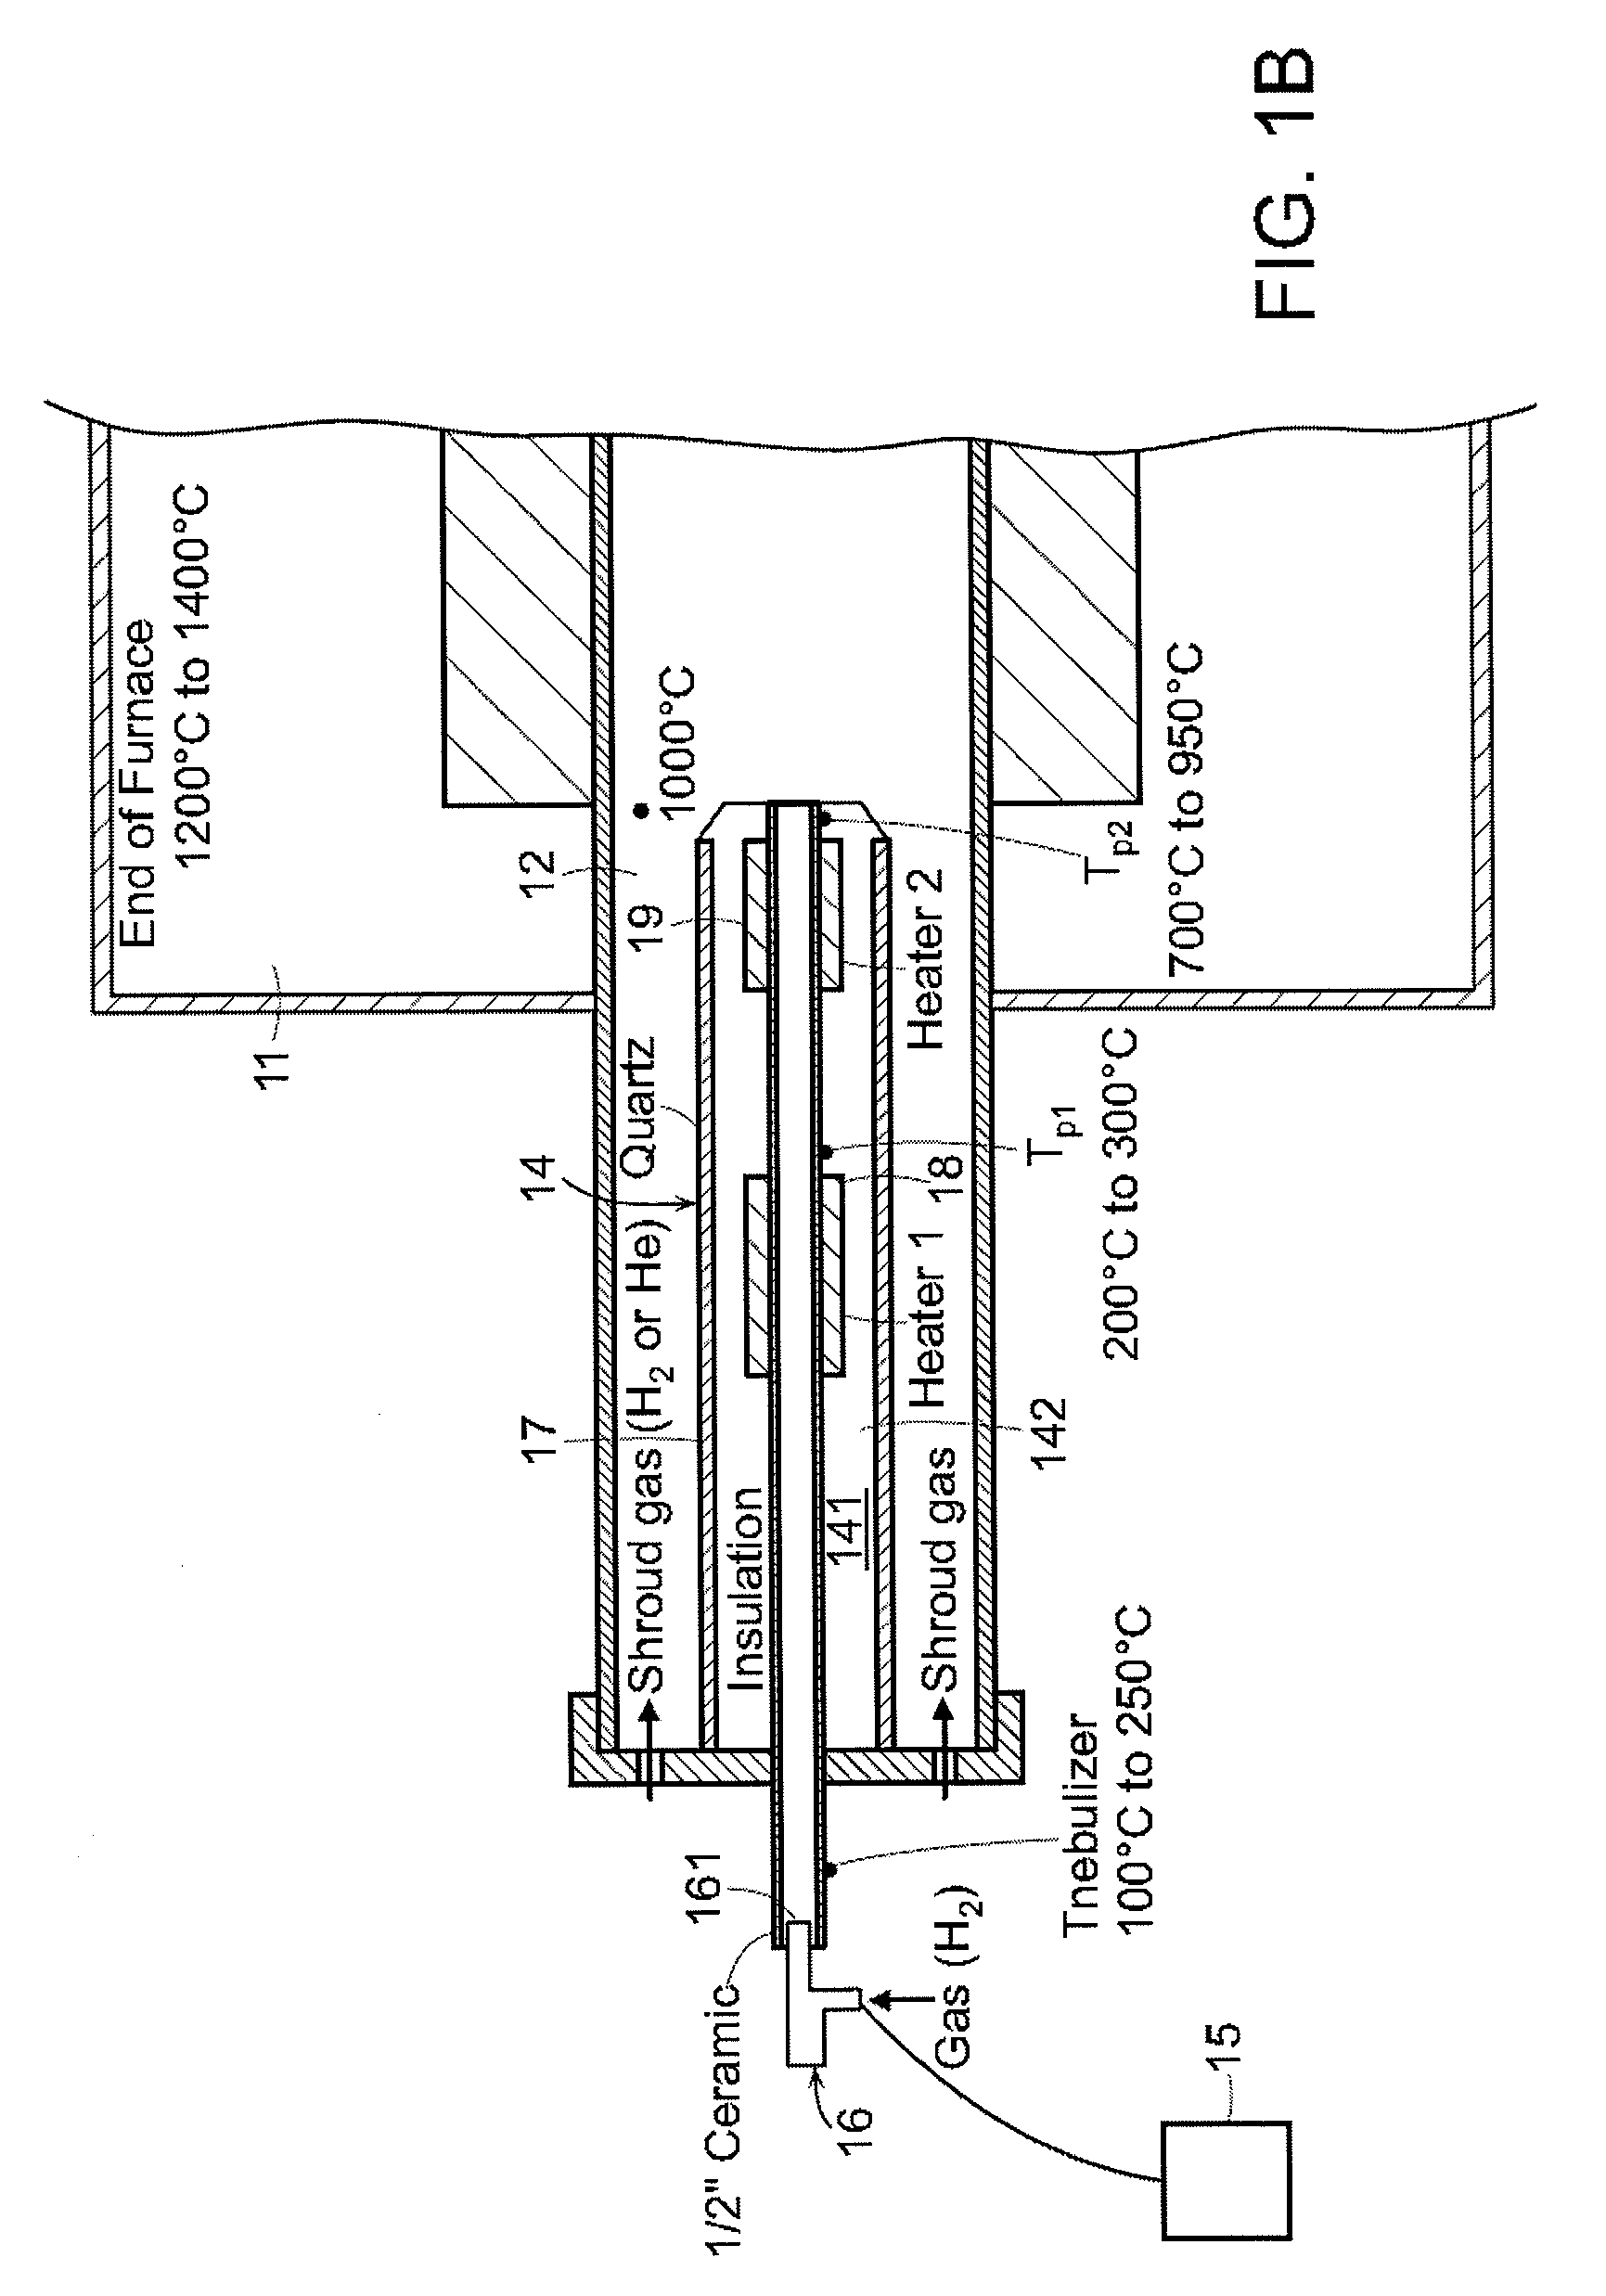 Injector Apparatus and Methods for Production of Nanostructures